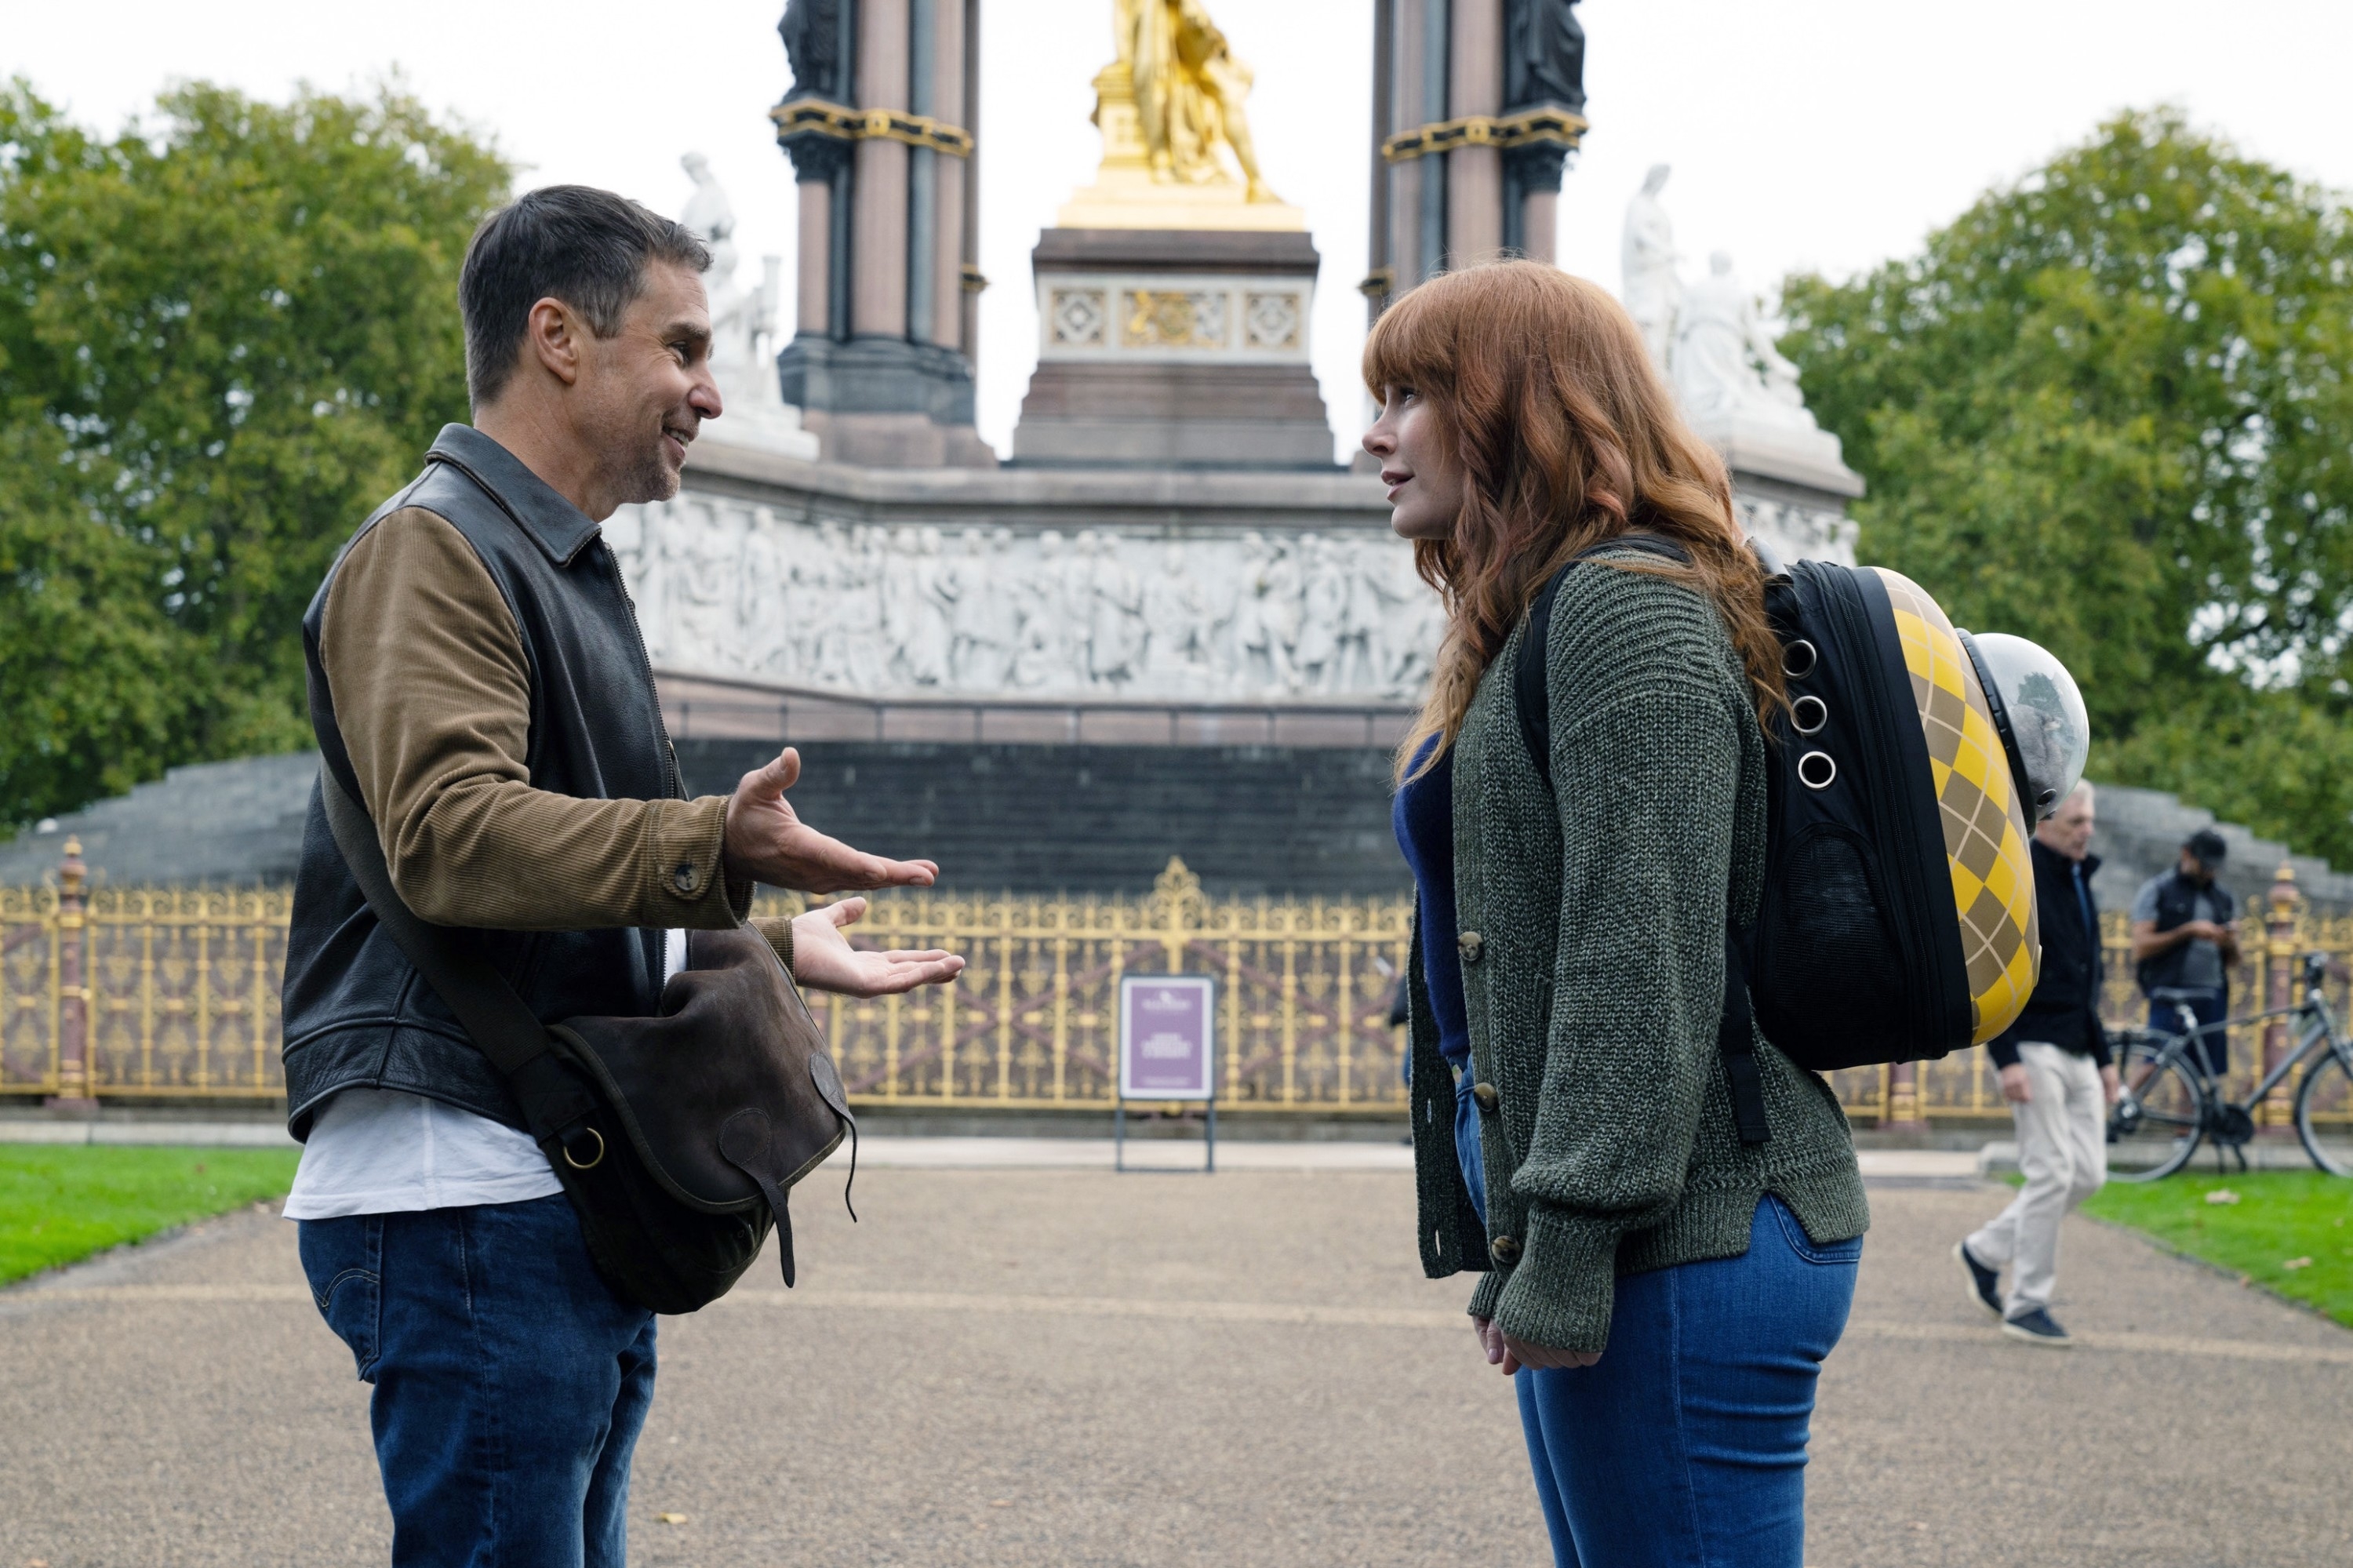 Two actors in a scene, Sam gesturing while talking to a smiling Bryce with a backpack, outdoors near a statue